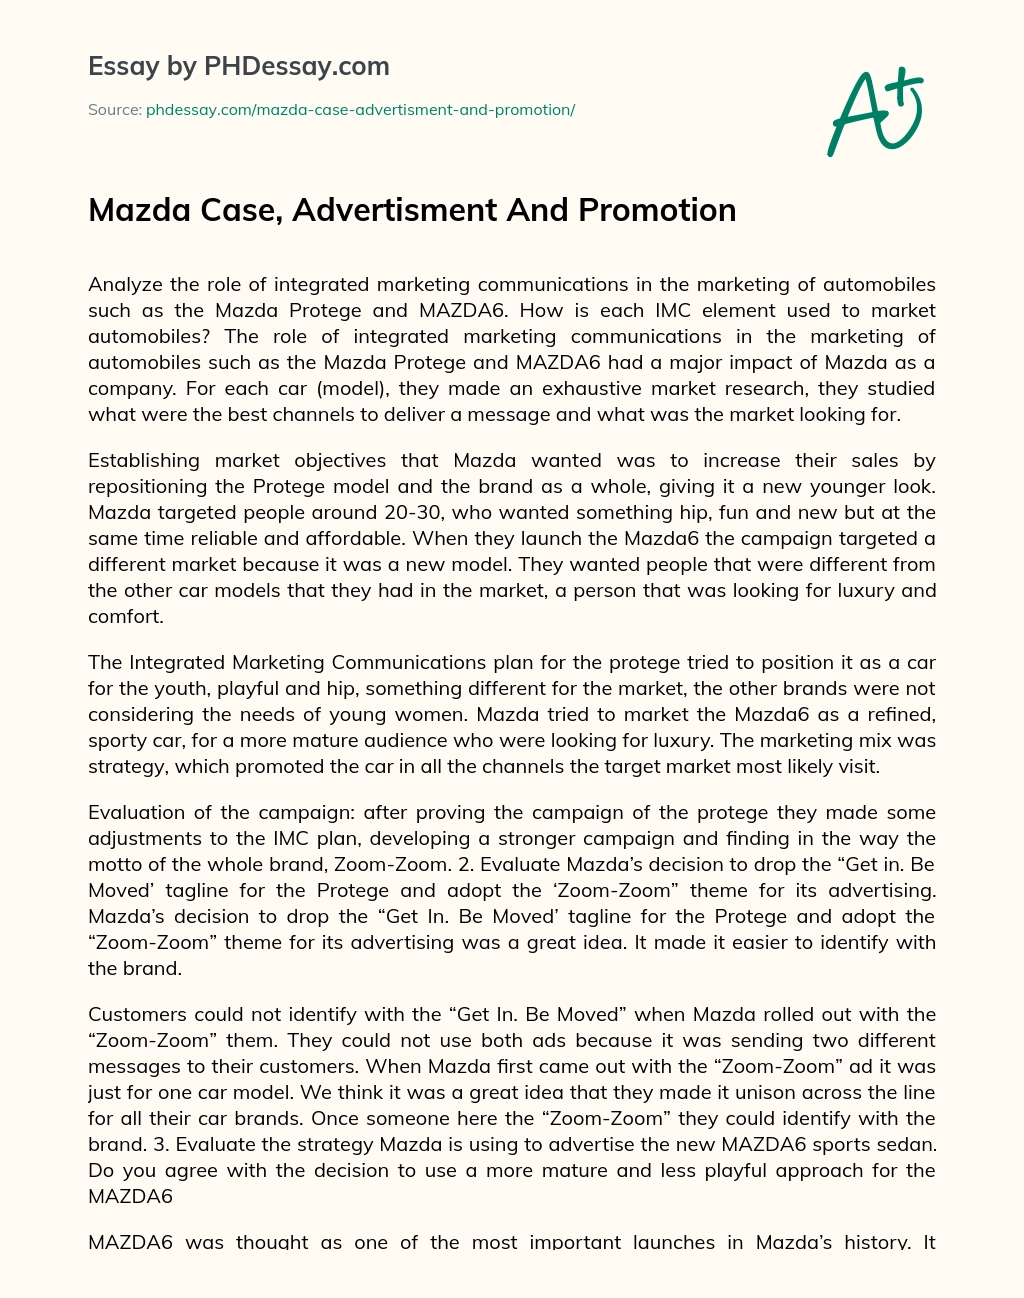 Mazda Case, Advertisment And Promotion essay